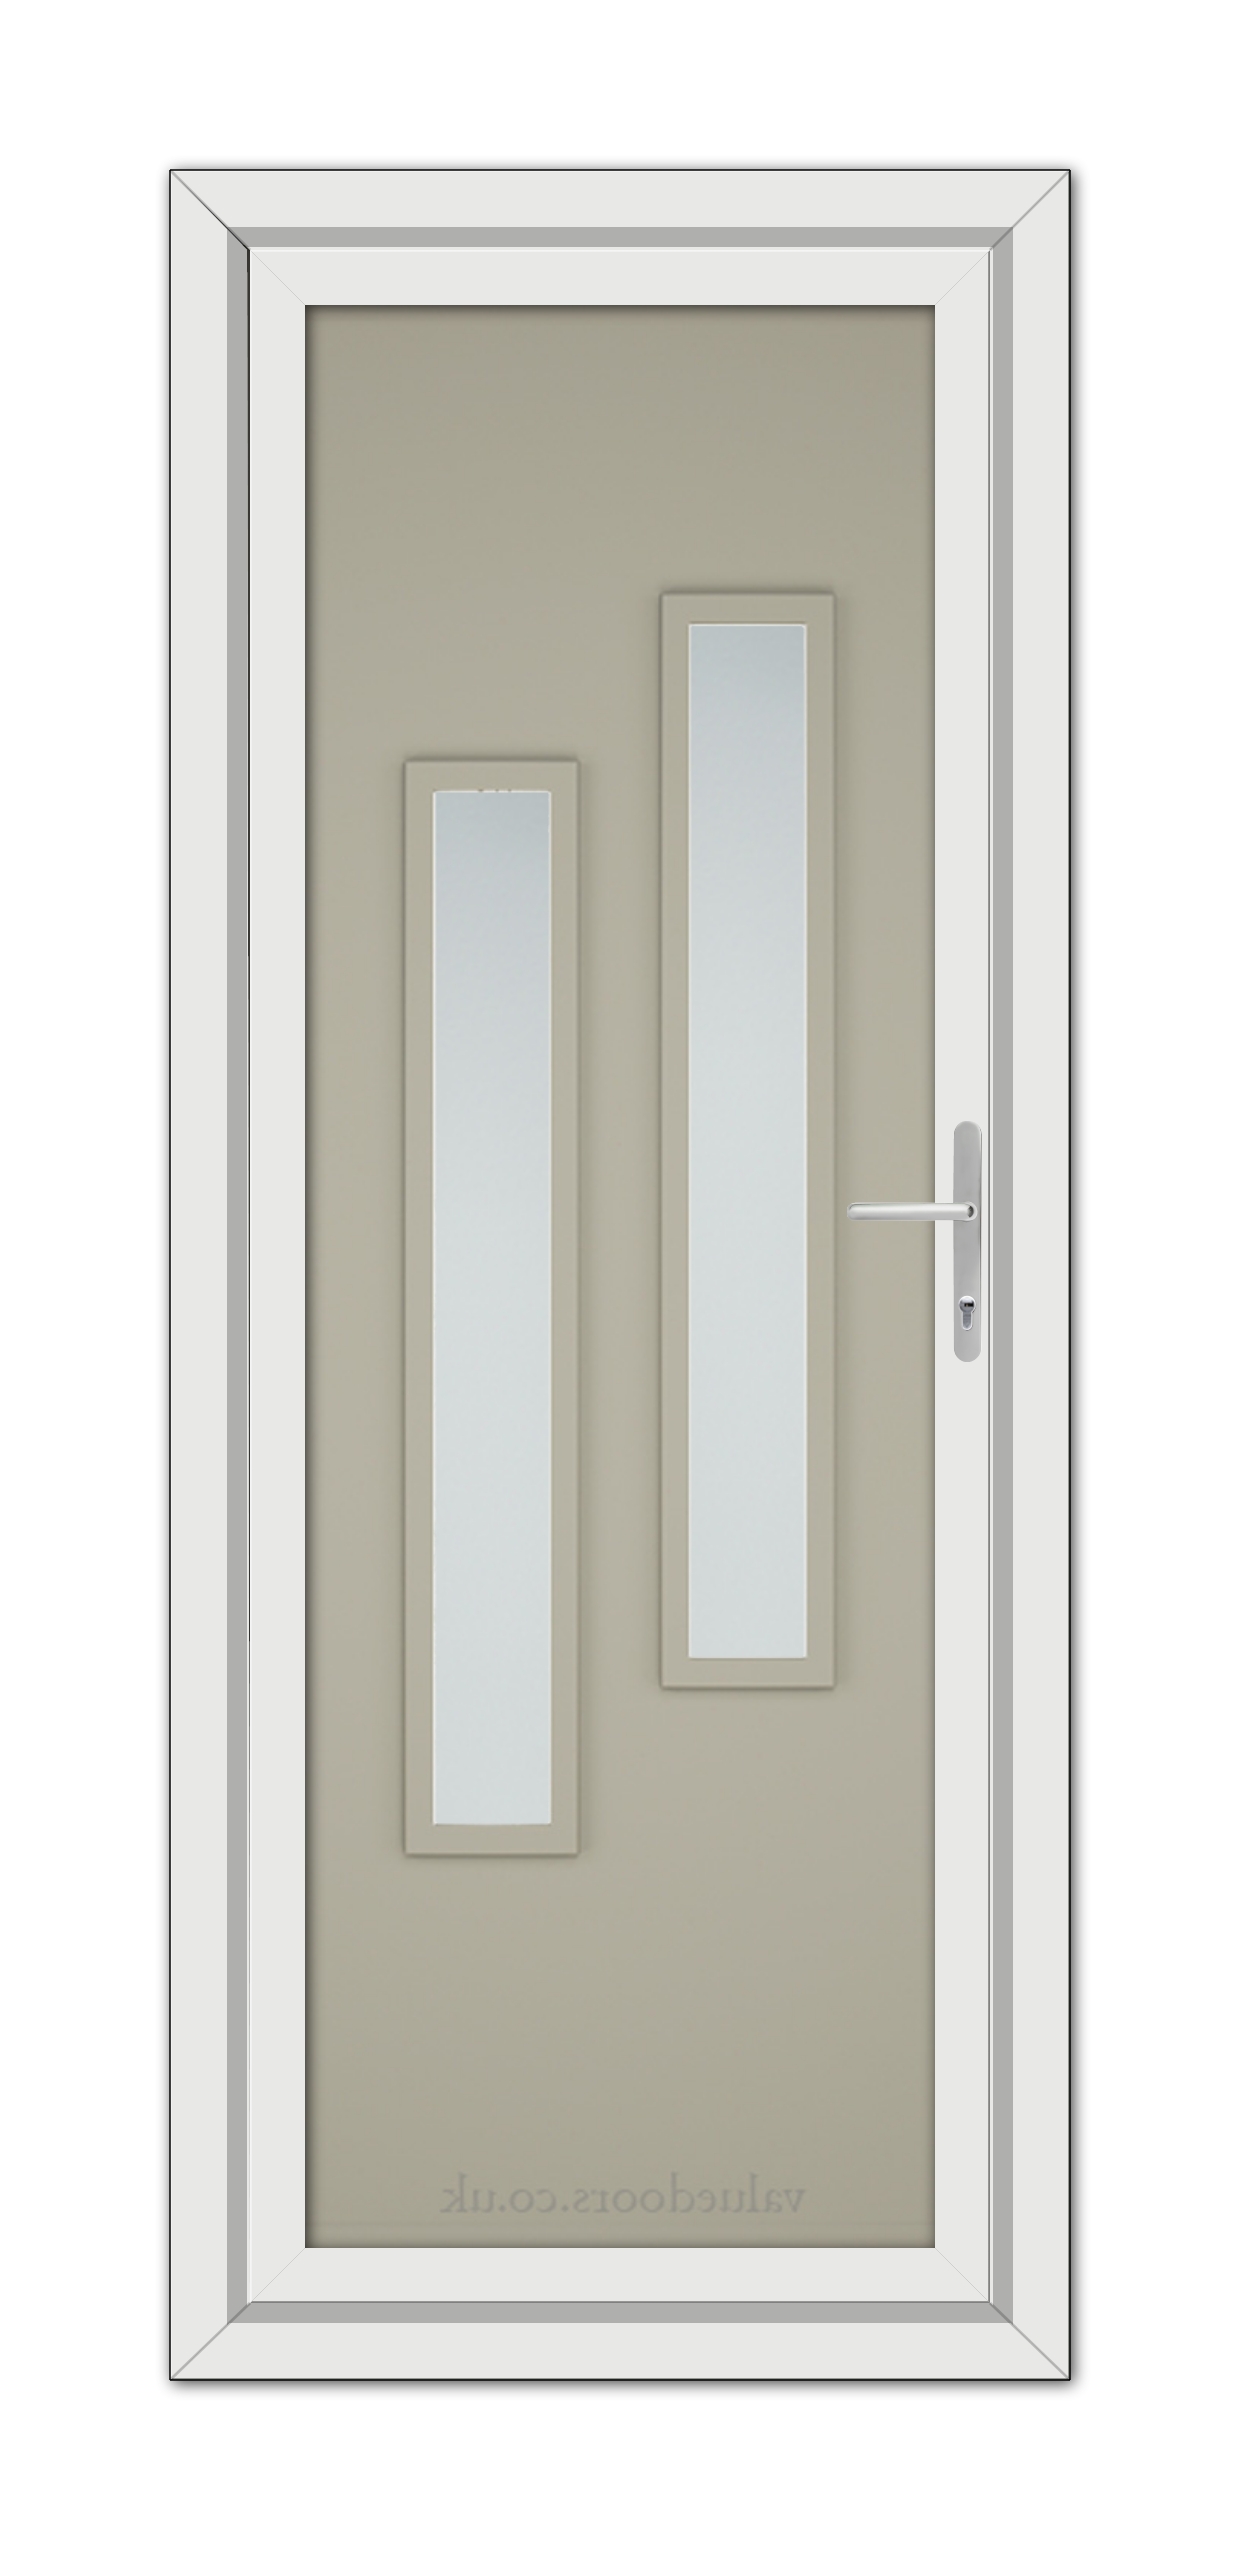 A modern Pebble Grey Modern 5082 uPVC door featuring two vertical glass panels and a metallic handle, set within a simple frame.